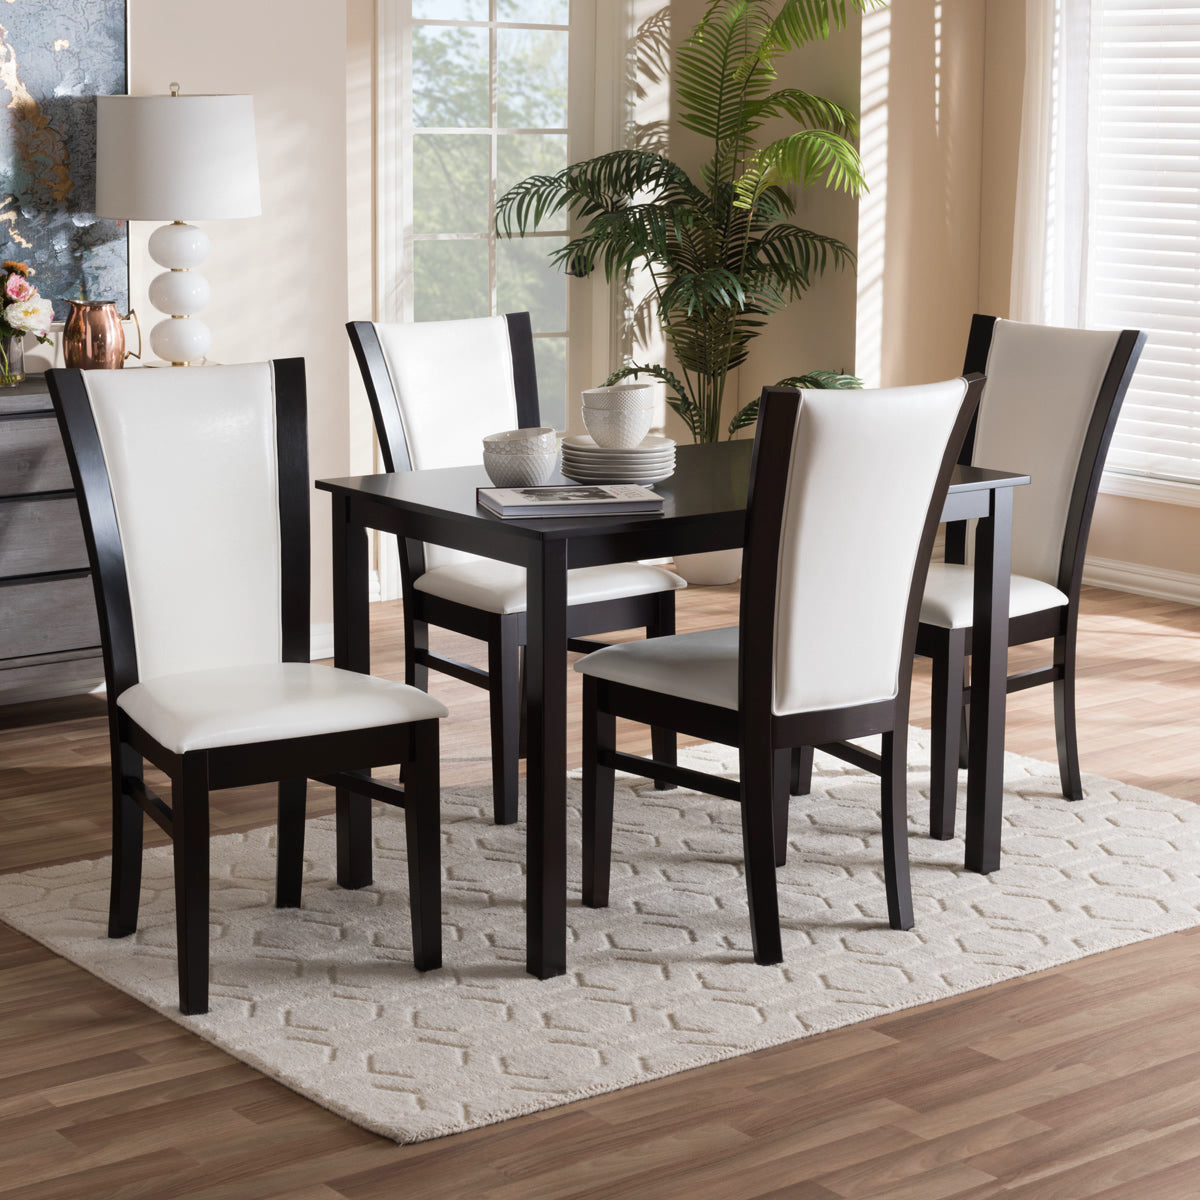 Baxton Studio Adley Modern and Contemporary 5-Piece Dark Brown Finished White Faux Leather Dining Set Baxton Studio-0-Minimal And Modern - 5